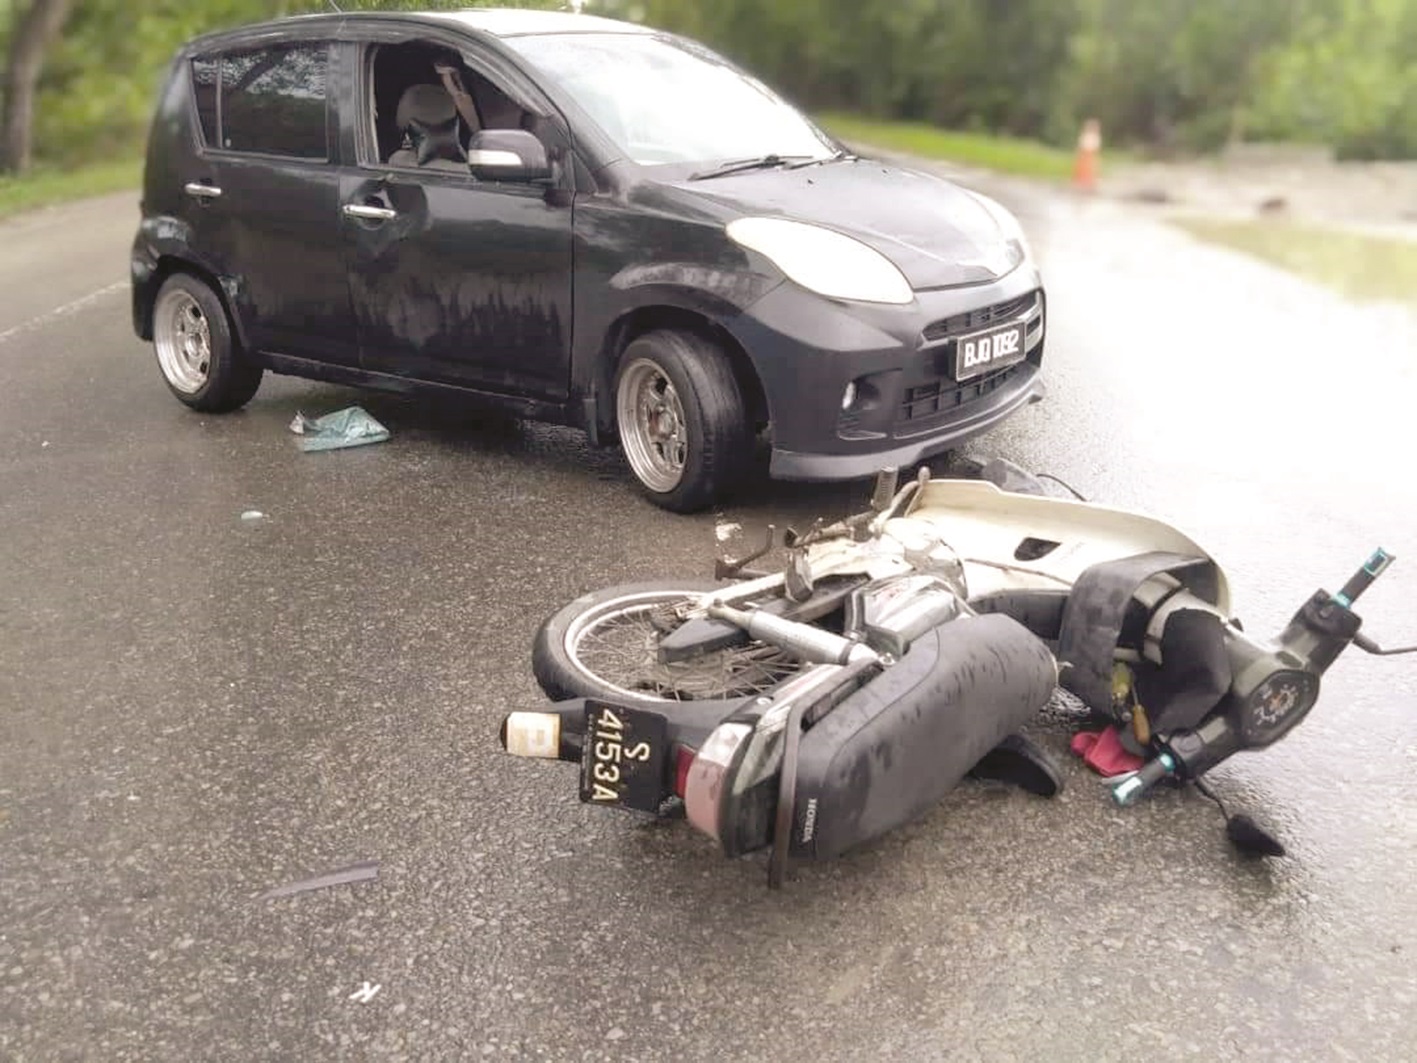 Snatch thieves end up losing motorcycle